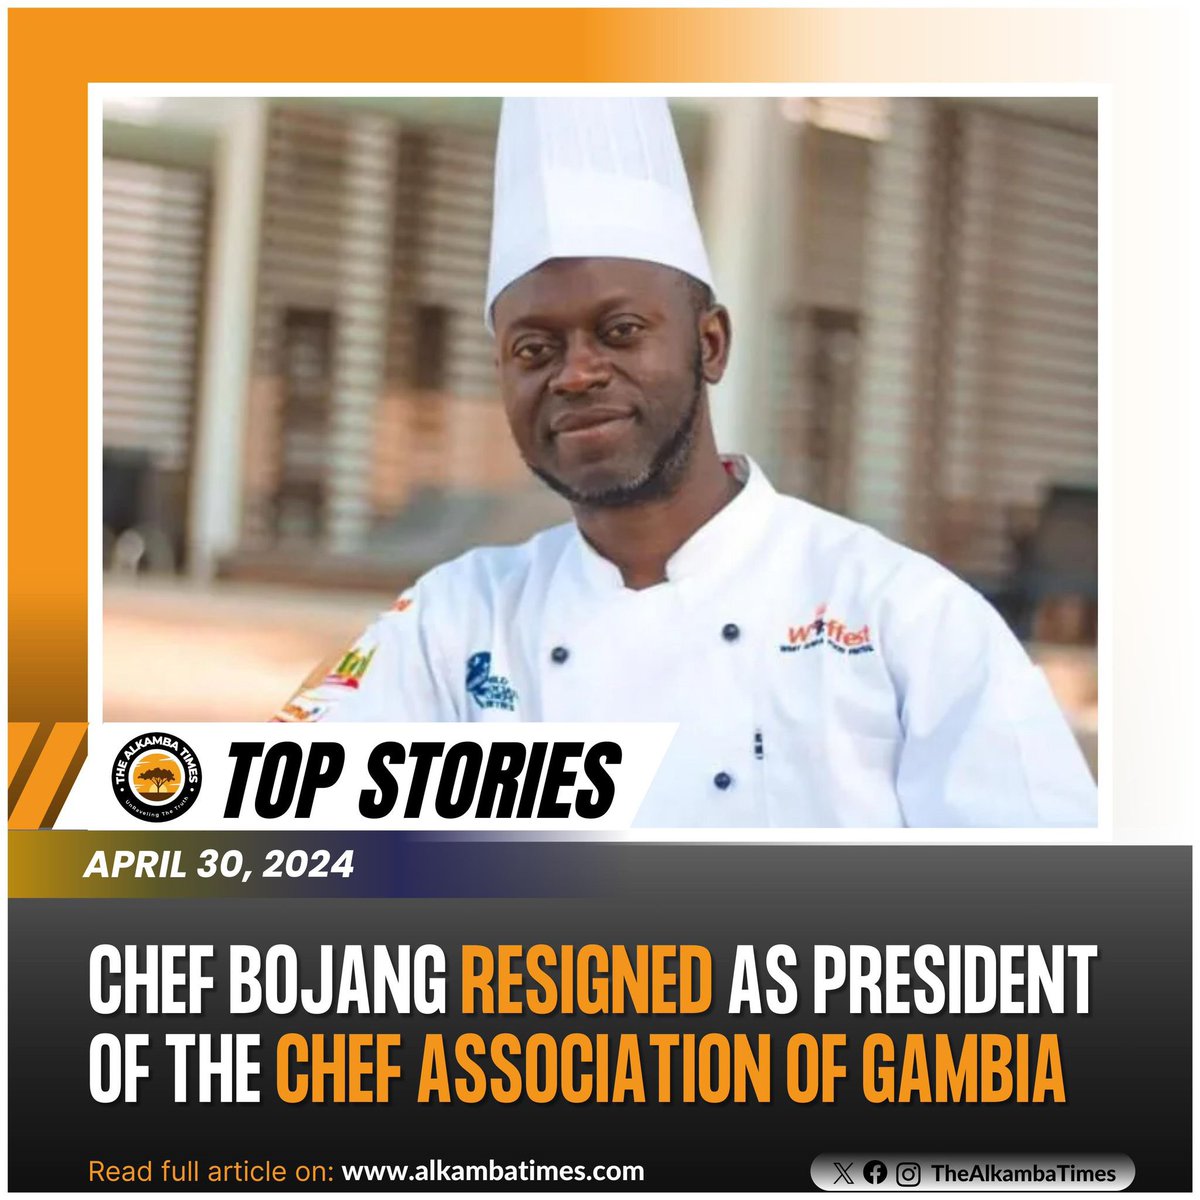 The Award-Winning International Gambian Chef Saikou Bojang, renowned for his culinary expertise, has tendered his resignation as the Chef Association of Gambia President over concerns of overstaying his two-term mandate as stipulated in the association constitution.  Sources told